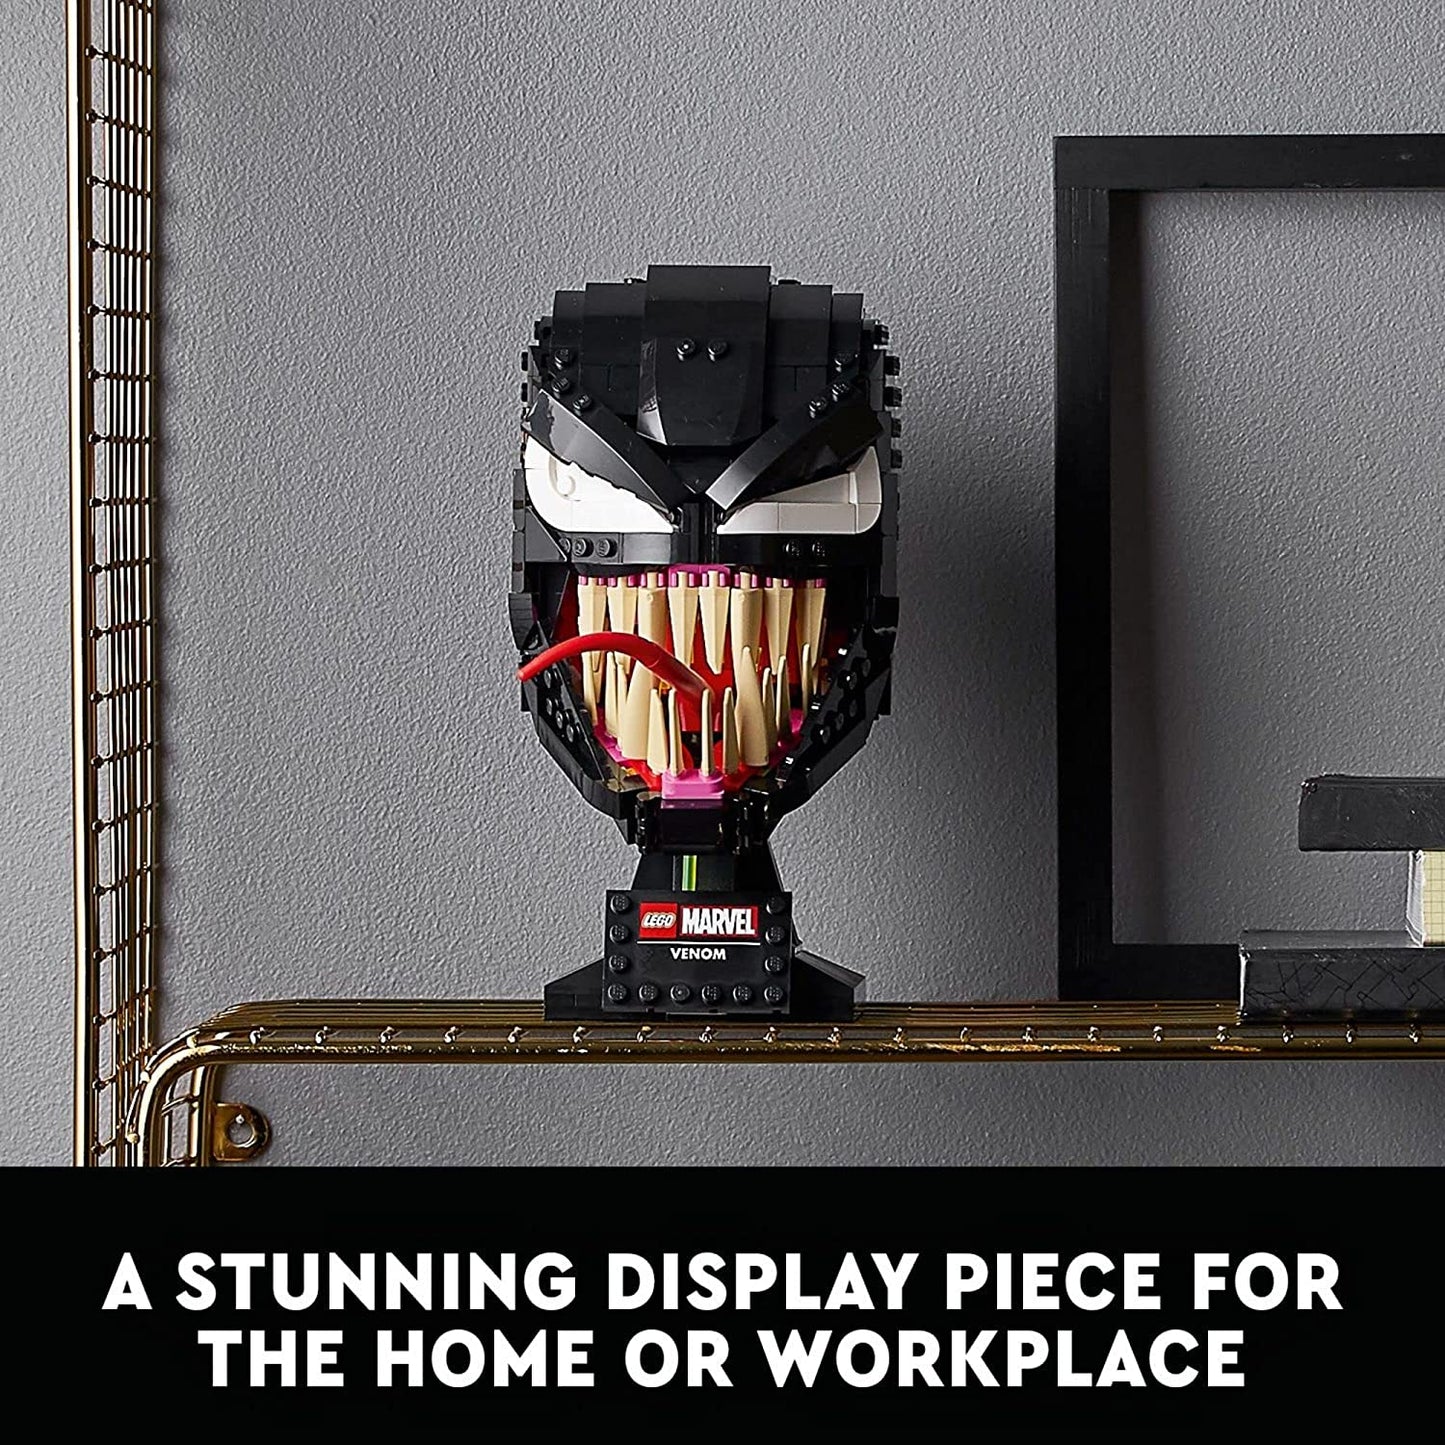 A fully complete model of Venom made from Lego sitting on a metal table. There is text which reads, "A stunning display piece for the home or workplace."